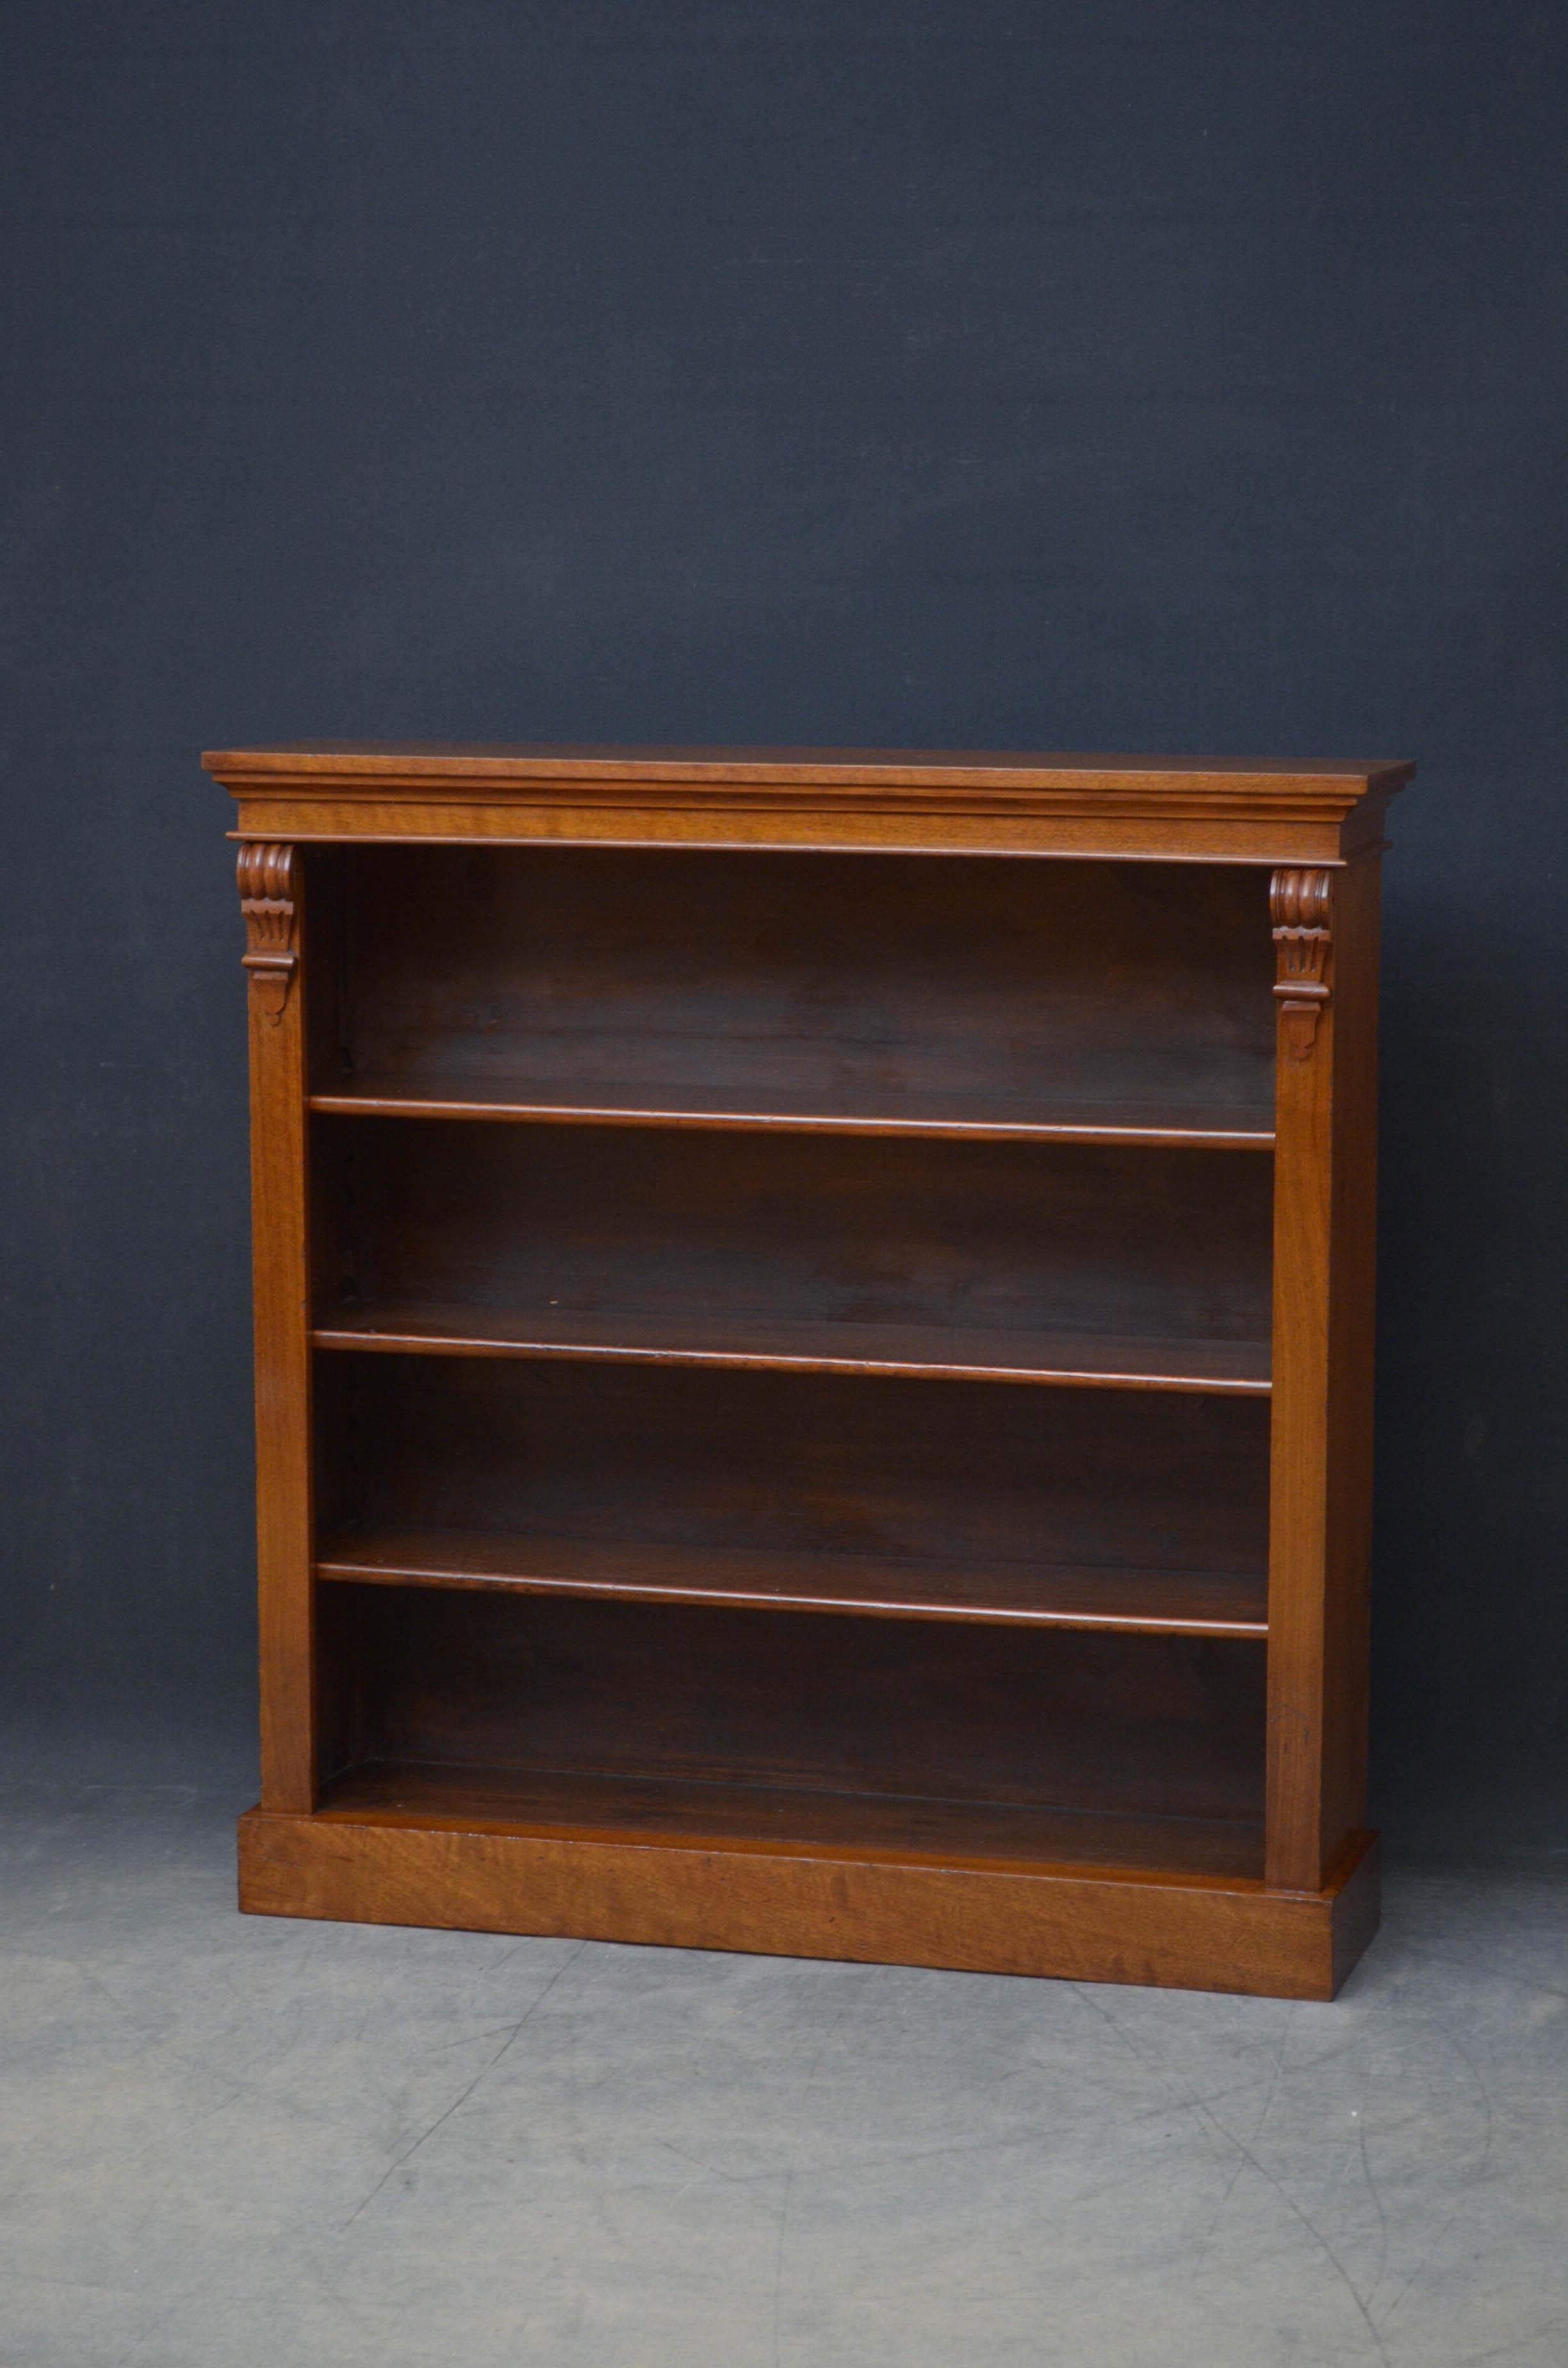 Sn5199 victorian figured walnut bookcase, having figured top above three height adjustable shelves flanked by drop carvings, all standing on plinth base. This antique bookcase has been syamthetically restored and is ready to place at home.